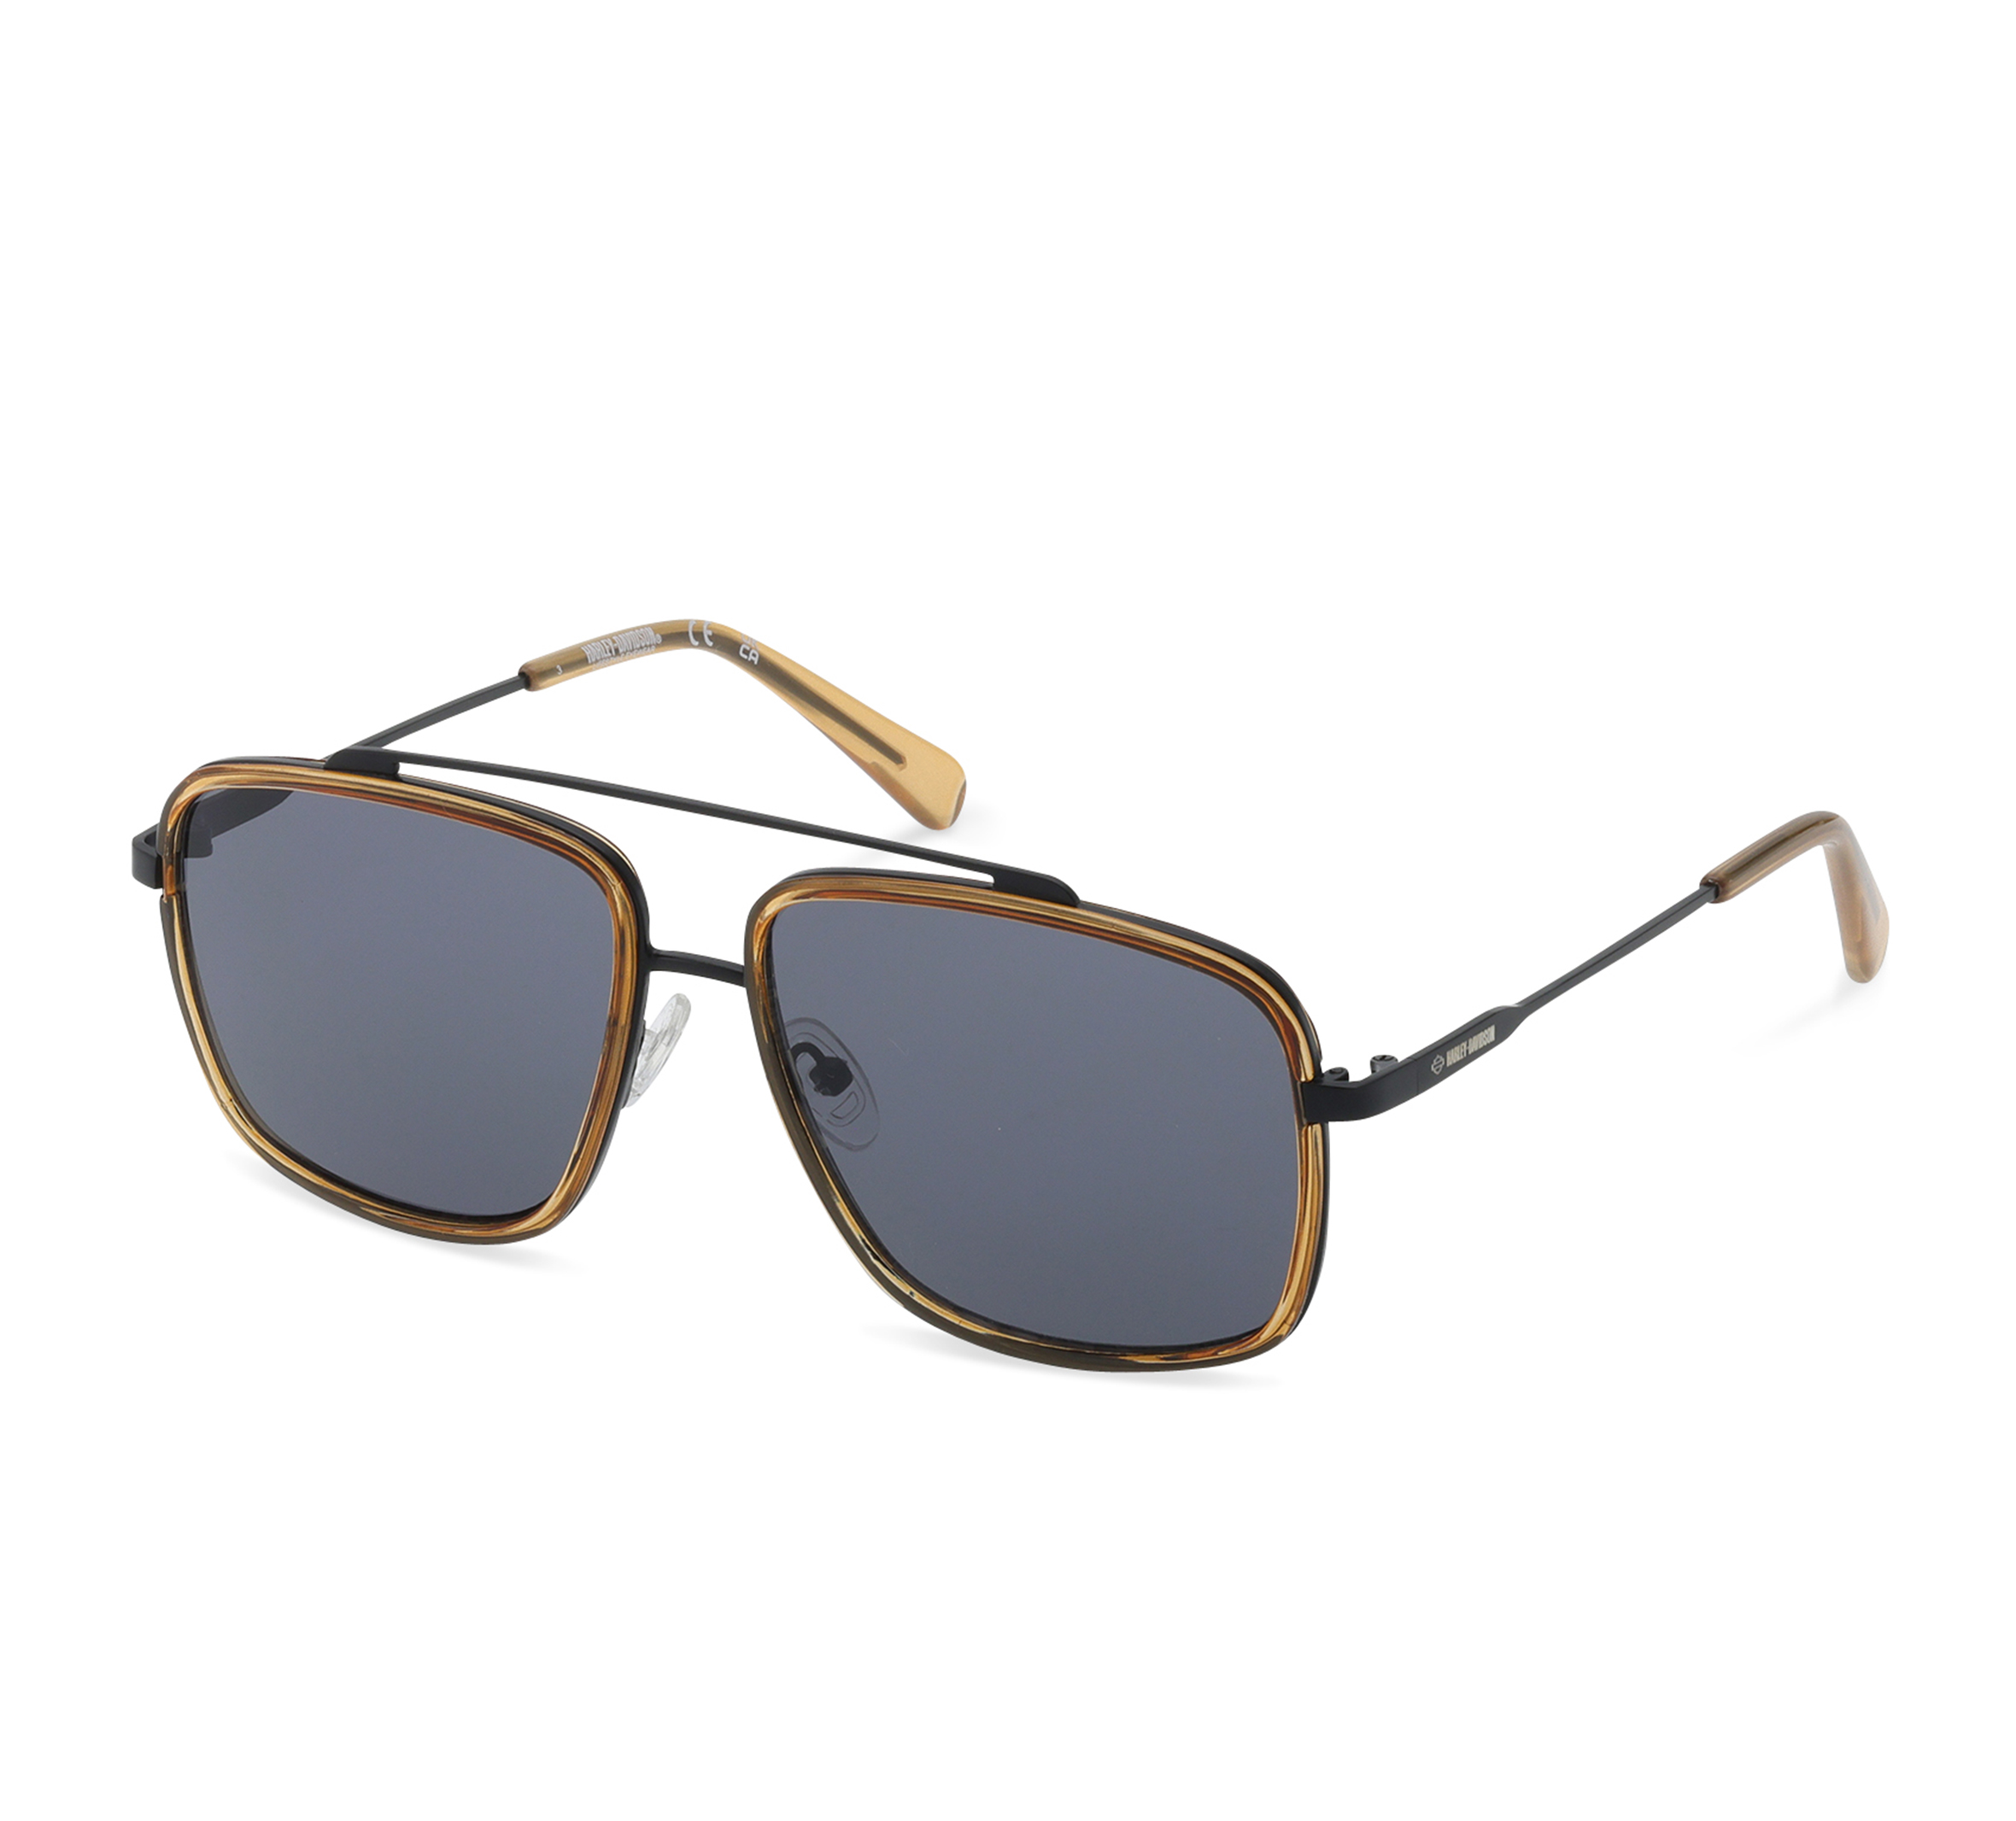 Calvin Klein Jeans Modified Rectangle Sunglasses with Grey Lens for Men:  Buy Calvin Klein Jeans Modified Rectangle Sunglasses with Grey Lens for Men  Online at Best Price in India | Nykaa